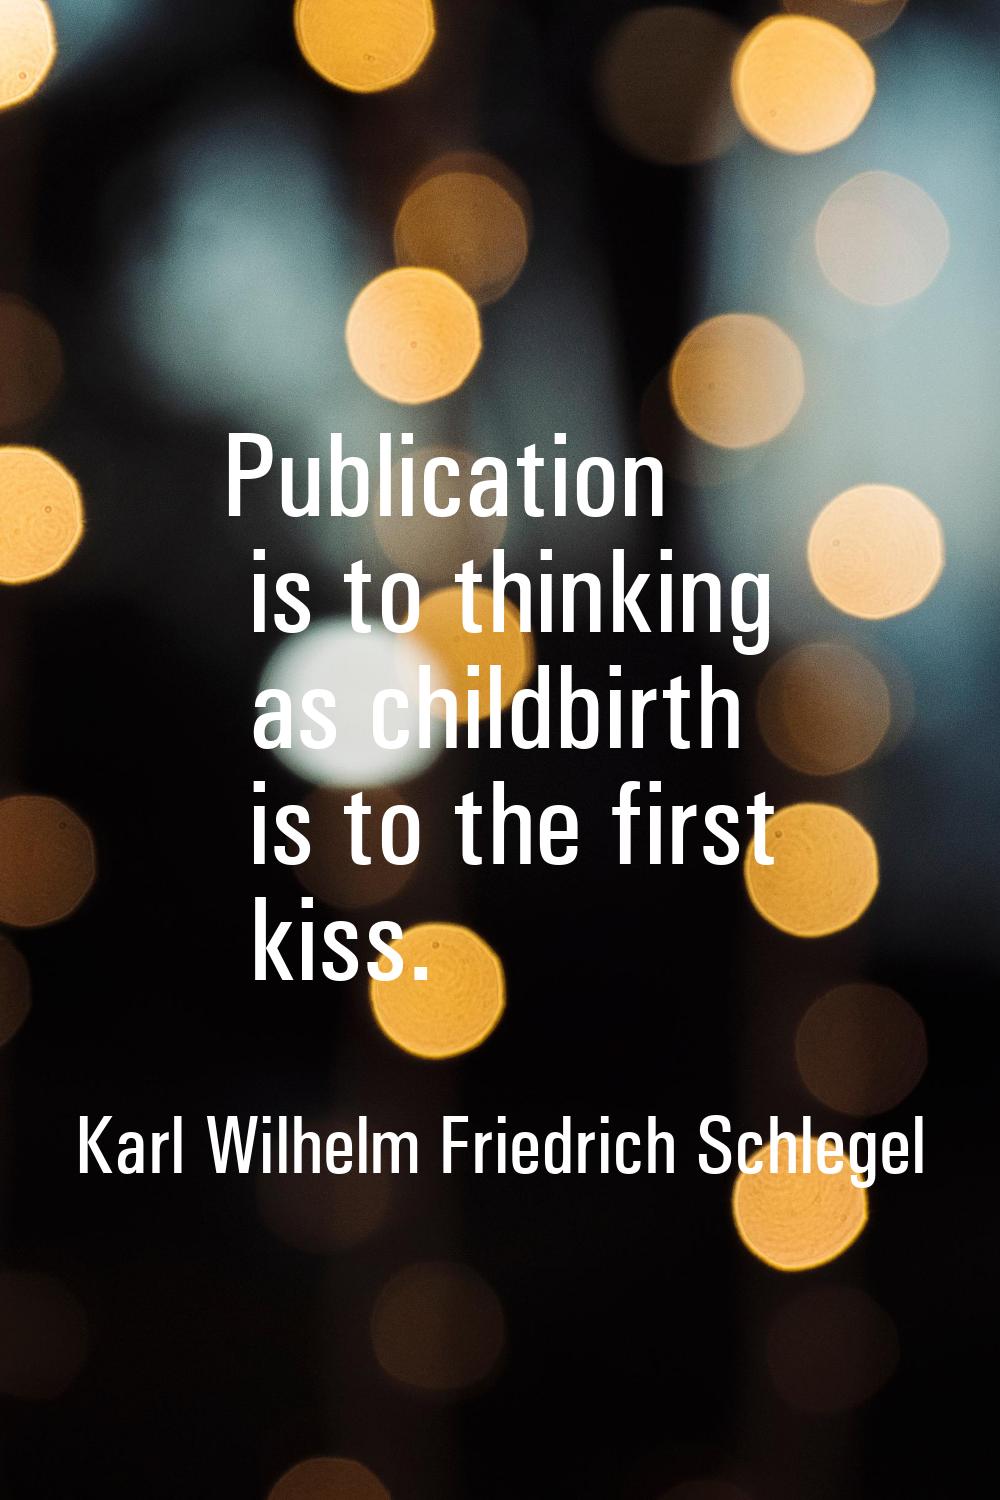 Publication is to thinking as childbirth is to the first kiss.